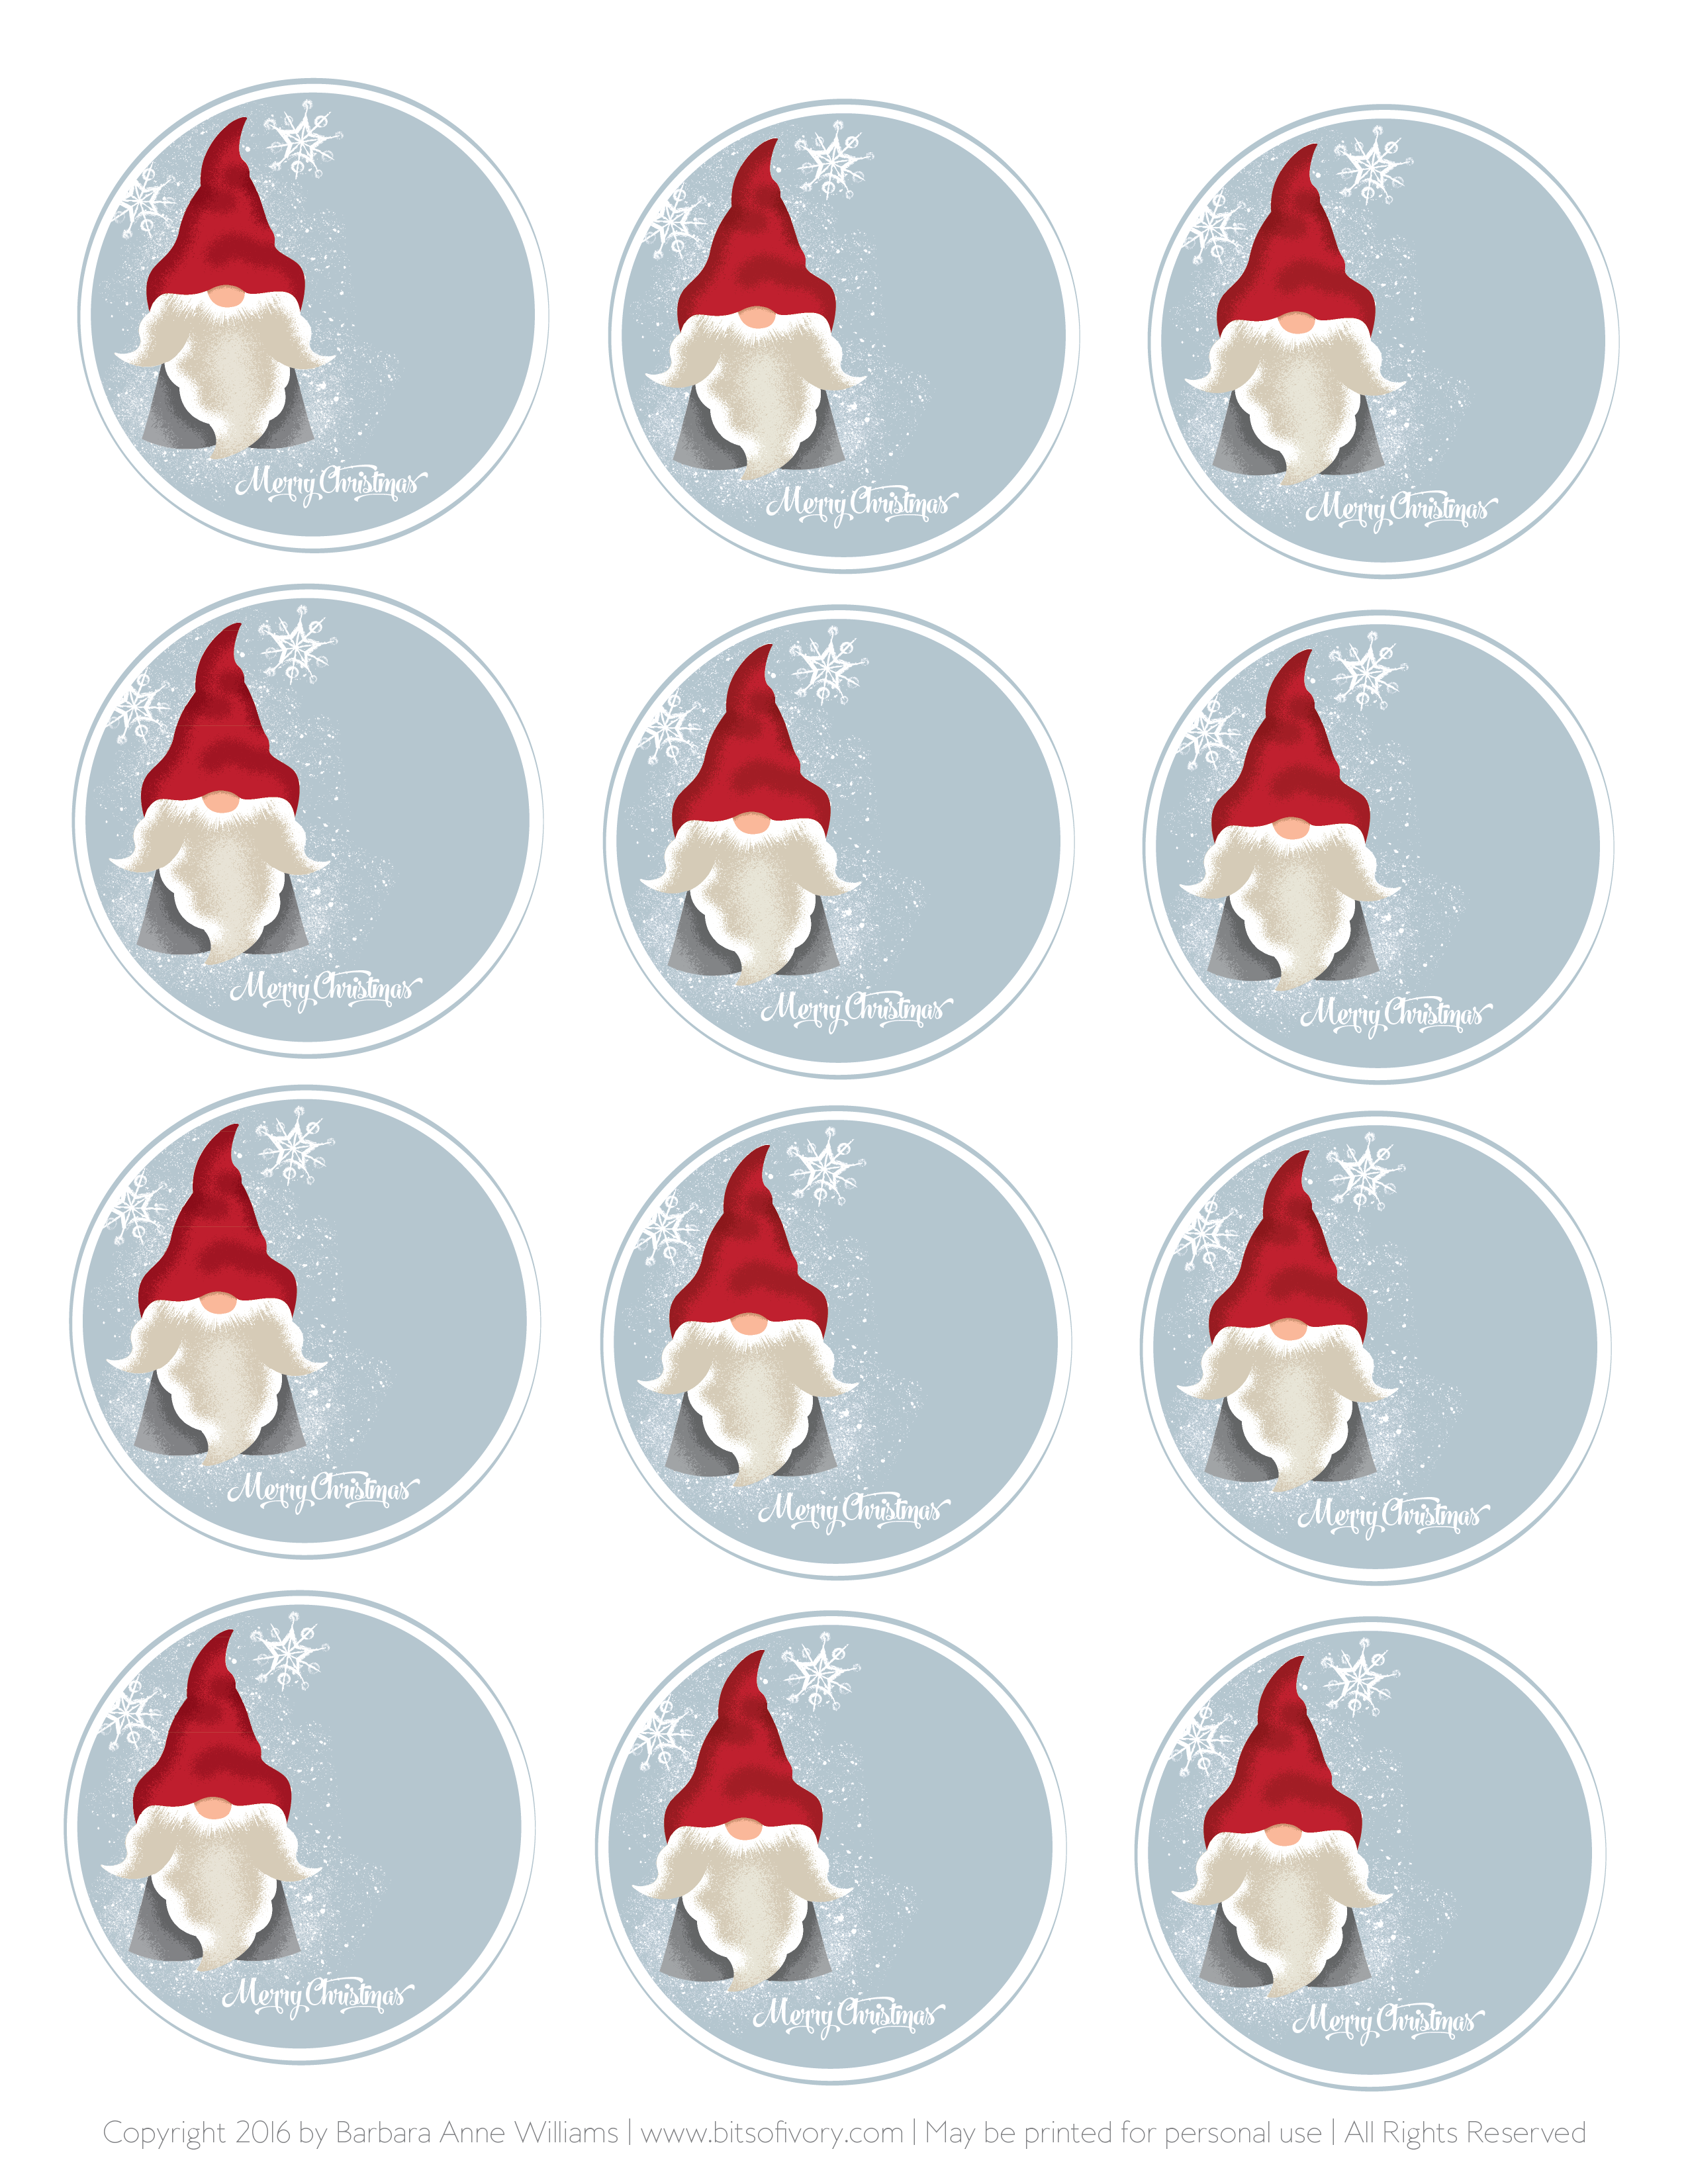 Printable Christmas Tags with Danish Nisse on snowy blue background from www.bitsofivory.com designed by Barbara Anne Williams